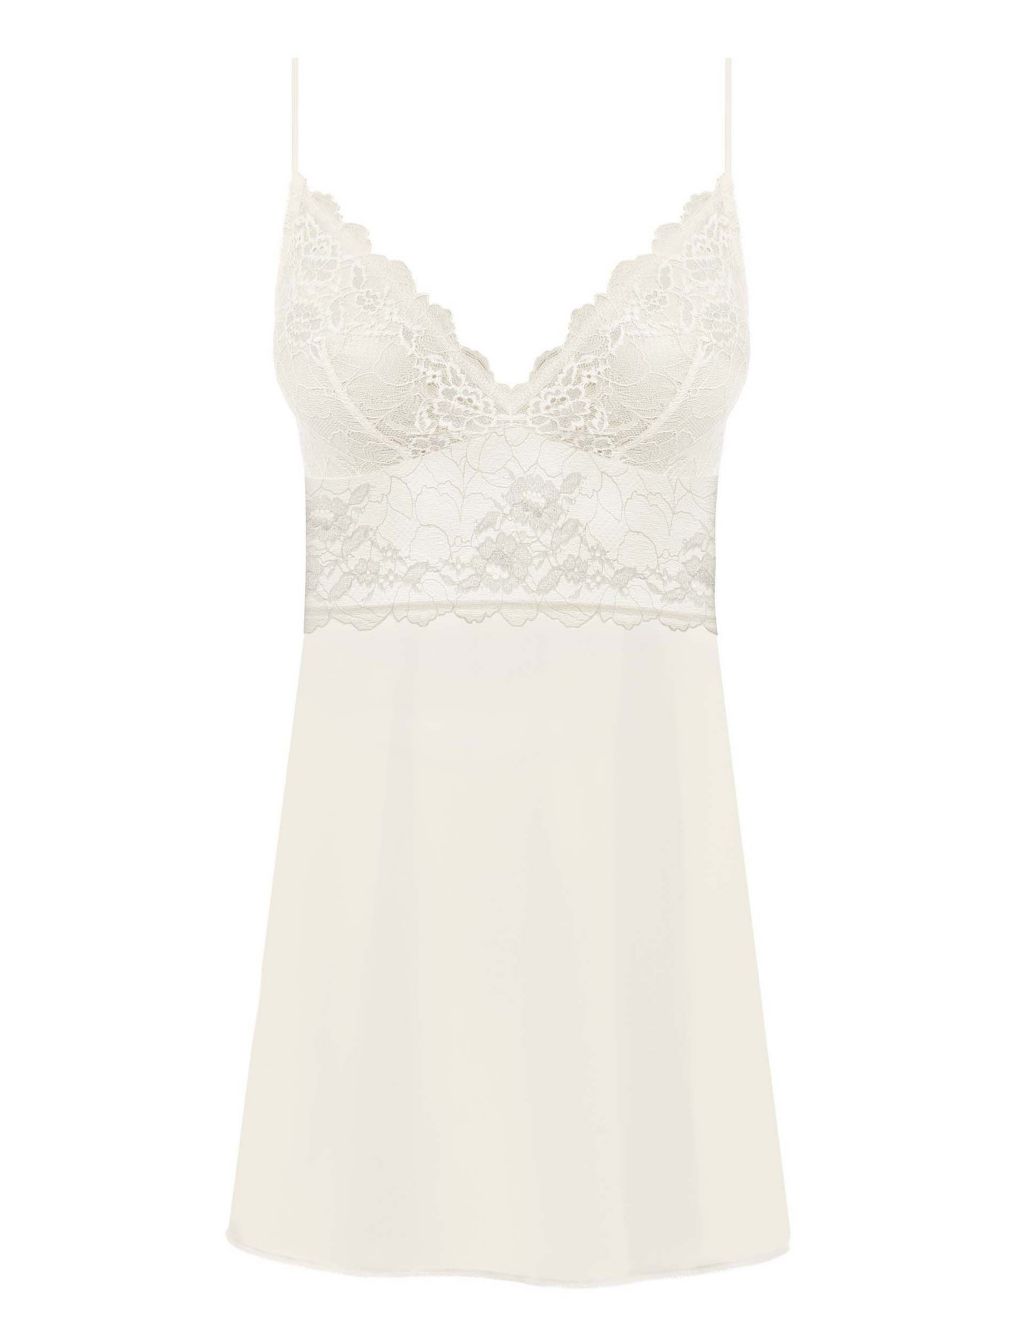 Lace Perfection Chemise 1 of 4